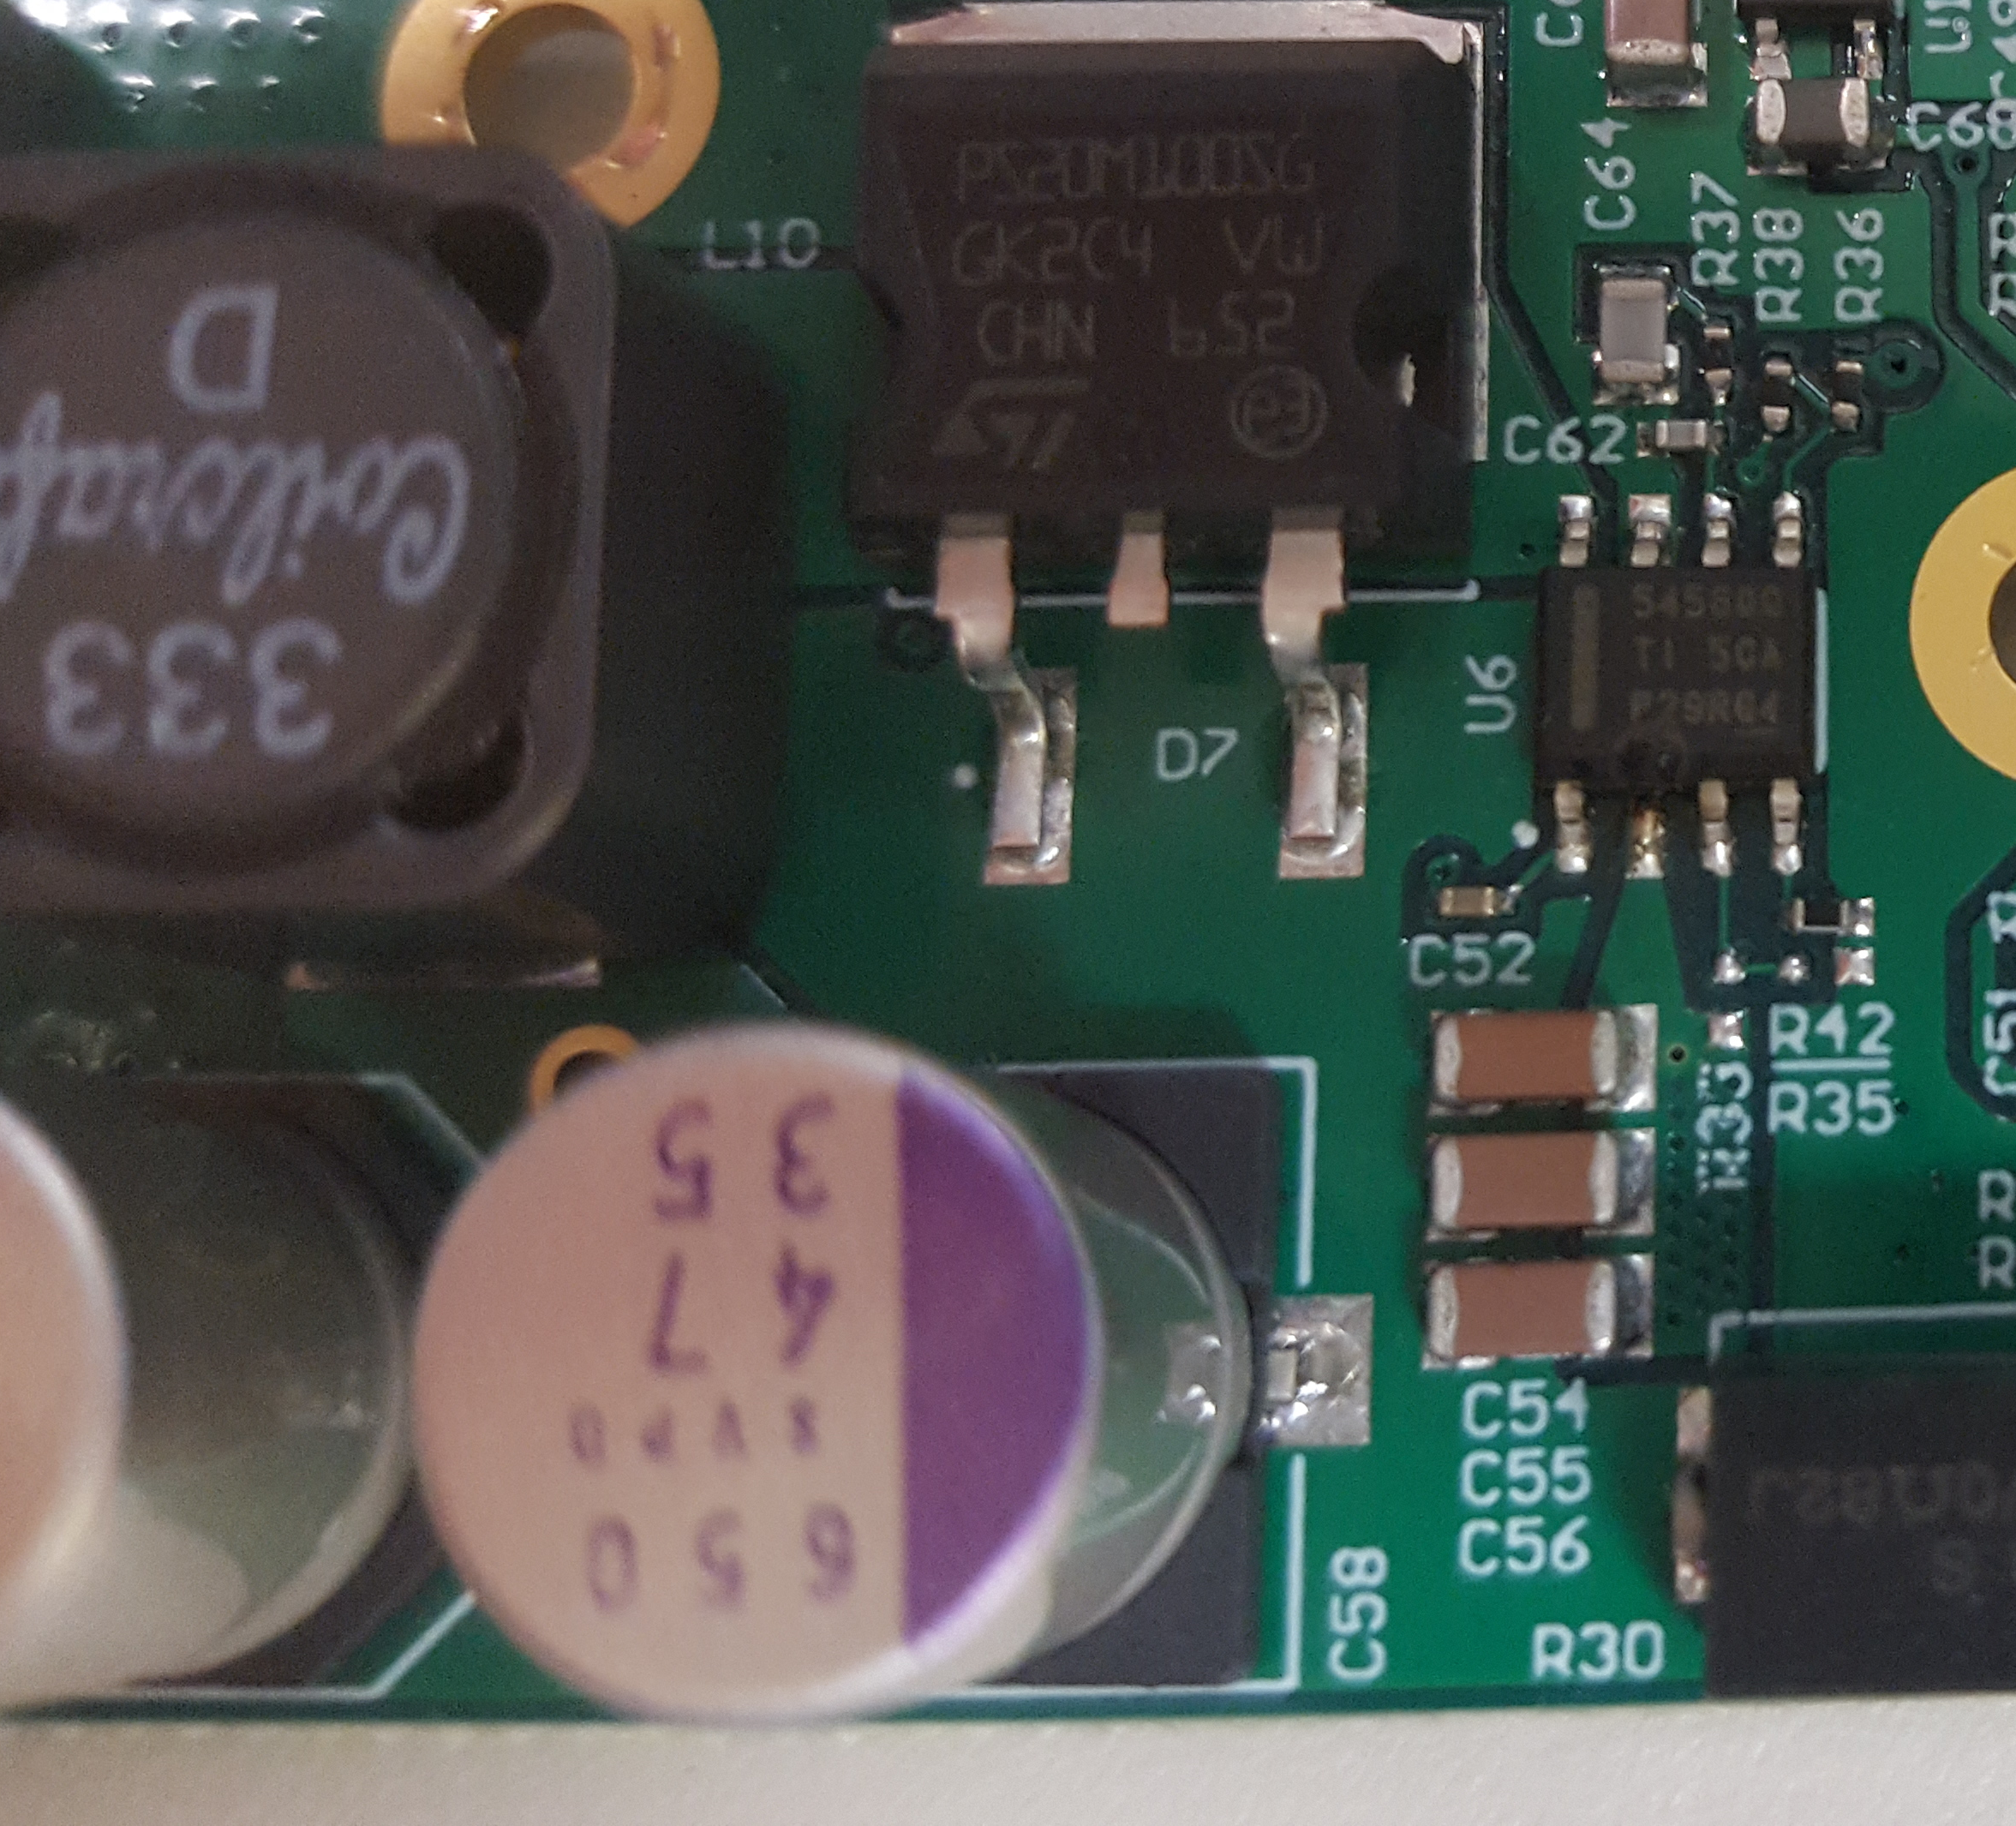 TPS7A37: Instability issues on output or bad soldering? - Power management  forum - Power management - TI E2E support forums